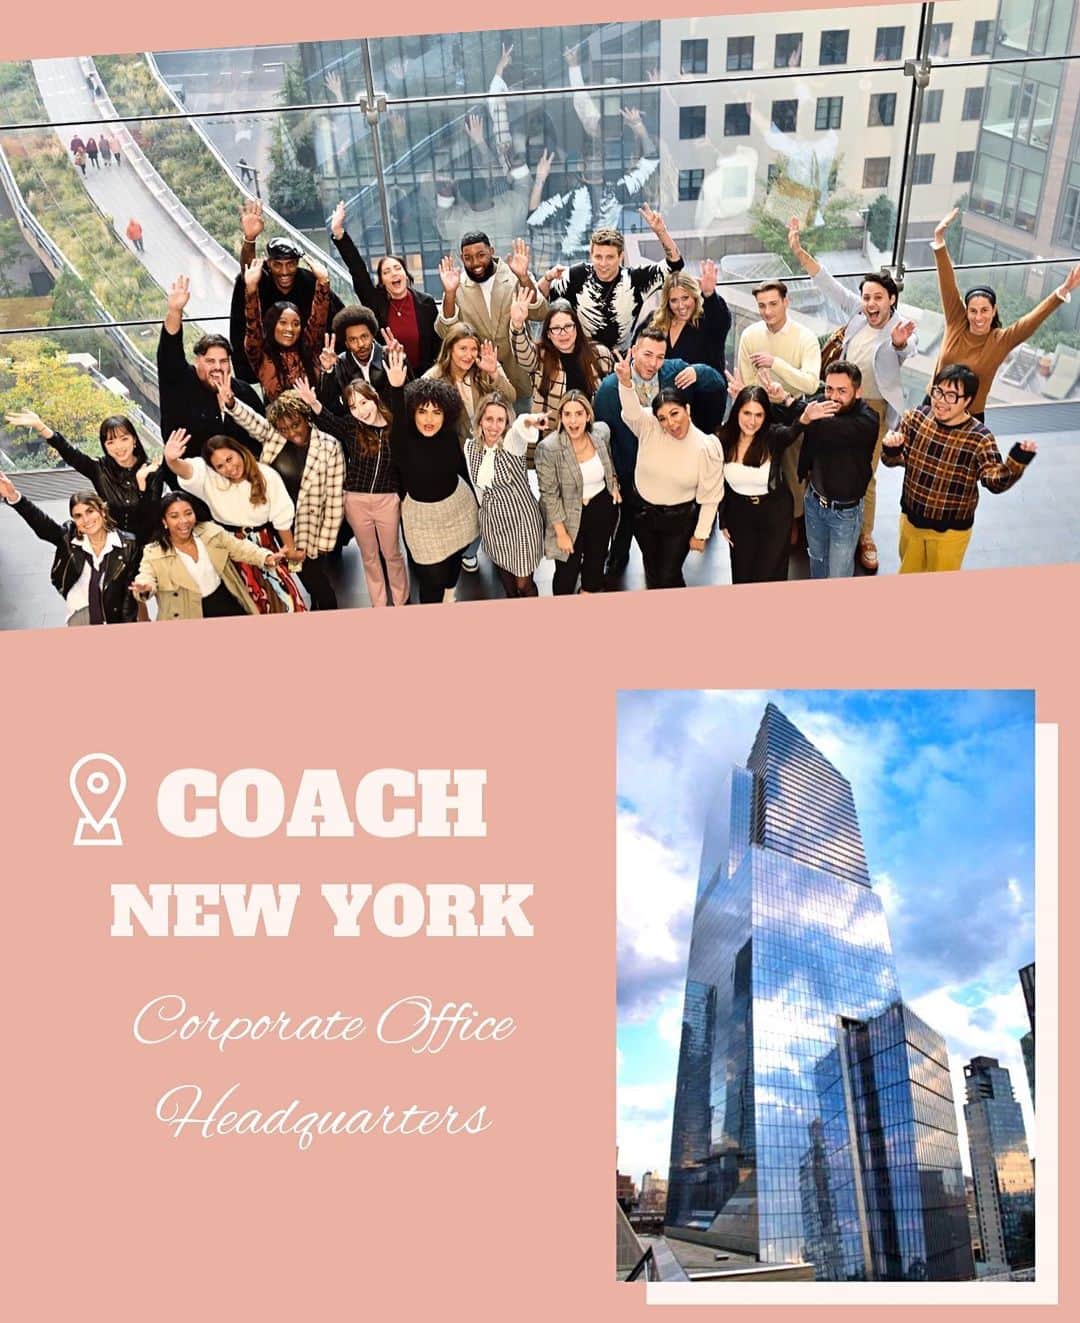 メロディー・モリタさんのインスタグラム写真 - (メロディー・モリタInstagram)「With the @COACH team during an exciting week at the headquarters in NY! I was invited as a guest speaker & mentor this time to share my personal tips and knowledge through my years of experience as a television reporter, interviewer, director and creator. Swipe for a short vid and pics✌️  The COACH fam gathered from across the US and Canada, and I was touched to see them listening carefully and taking notes during my presentation, asking detailed questions, and implementing what I shared with them right away. I also took part in several fun activities including judging alongside COACH experts like Project Runway.😁👠 It was awesome being able to finally meet and speak in person after years of virtual meetings and sessions like these! Felt so motivated by everyone, and loving all the smiles in the last slide!😄  Hope you all have a wonderful weekend💕 Song by Lil Nas X, the newest brand ambassador✨  COACHと数ヶ月前から進めていた企画のため、再びニューヨーク本社へ🗽  今回は「ゲストスピーカー＆講師」としてお声掛け頂き、私の仕事であるテレビリポーター＆インタビュアー、ディレクター、クリエイターとしての経歴と体験談などを交えながら色々なトピックについてシェアさせて頂きました✨  アメリカ全国＆カナダより、新入社員からベテランまでの年齢も様々なCOACHチームが集結。私のプレゼンを聞きながら一生懸命メモをとっていたり、最後の質疑応答では時間が足りなくなるほどの質問もくれて... 常に最高の結果を出そうと頑張っている、最強の仲間たちの姿に、私も強い刺激を受けました。  今までリモートが当たり前の世界となっていましたが、やはり対面での空気は全く違う💡 やっと普通にみんなに会える＆面と向かって会話し、意見交換ができて嬉しい☺️🎀 ラストスライドのみんなの笑顔が最高！🙌 #coach #coachny #NY #ニューヨーク」10月29日 22時47分 - melodeemorita